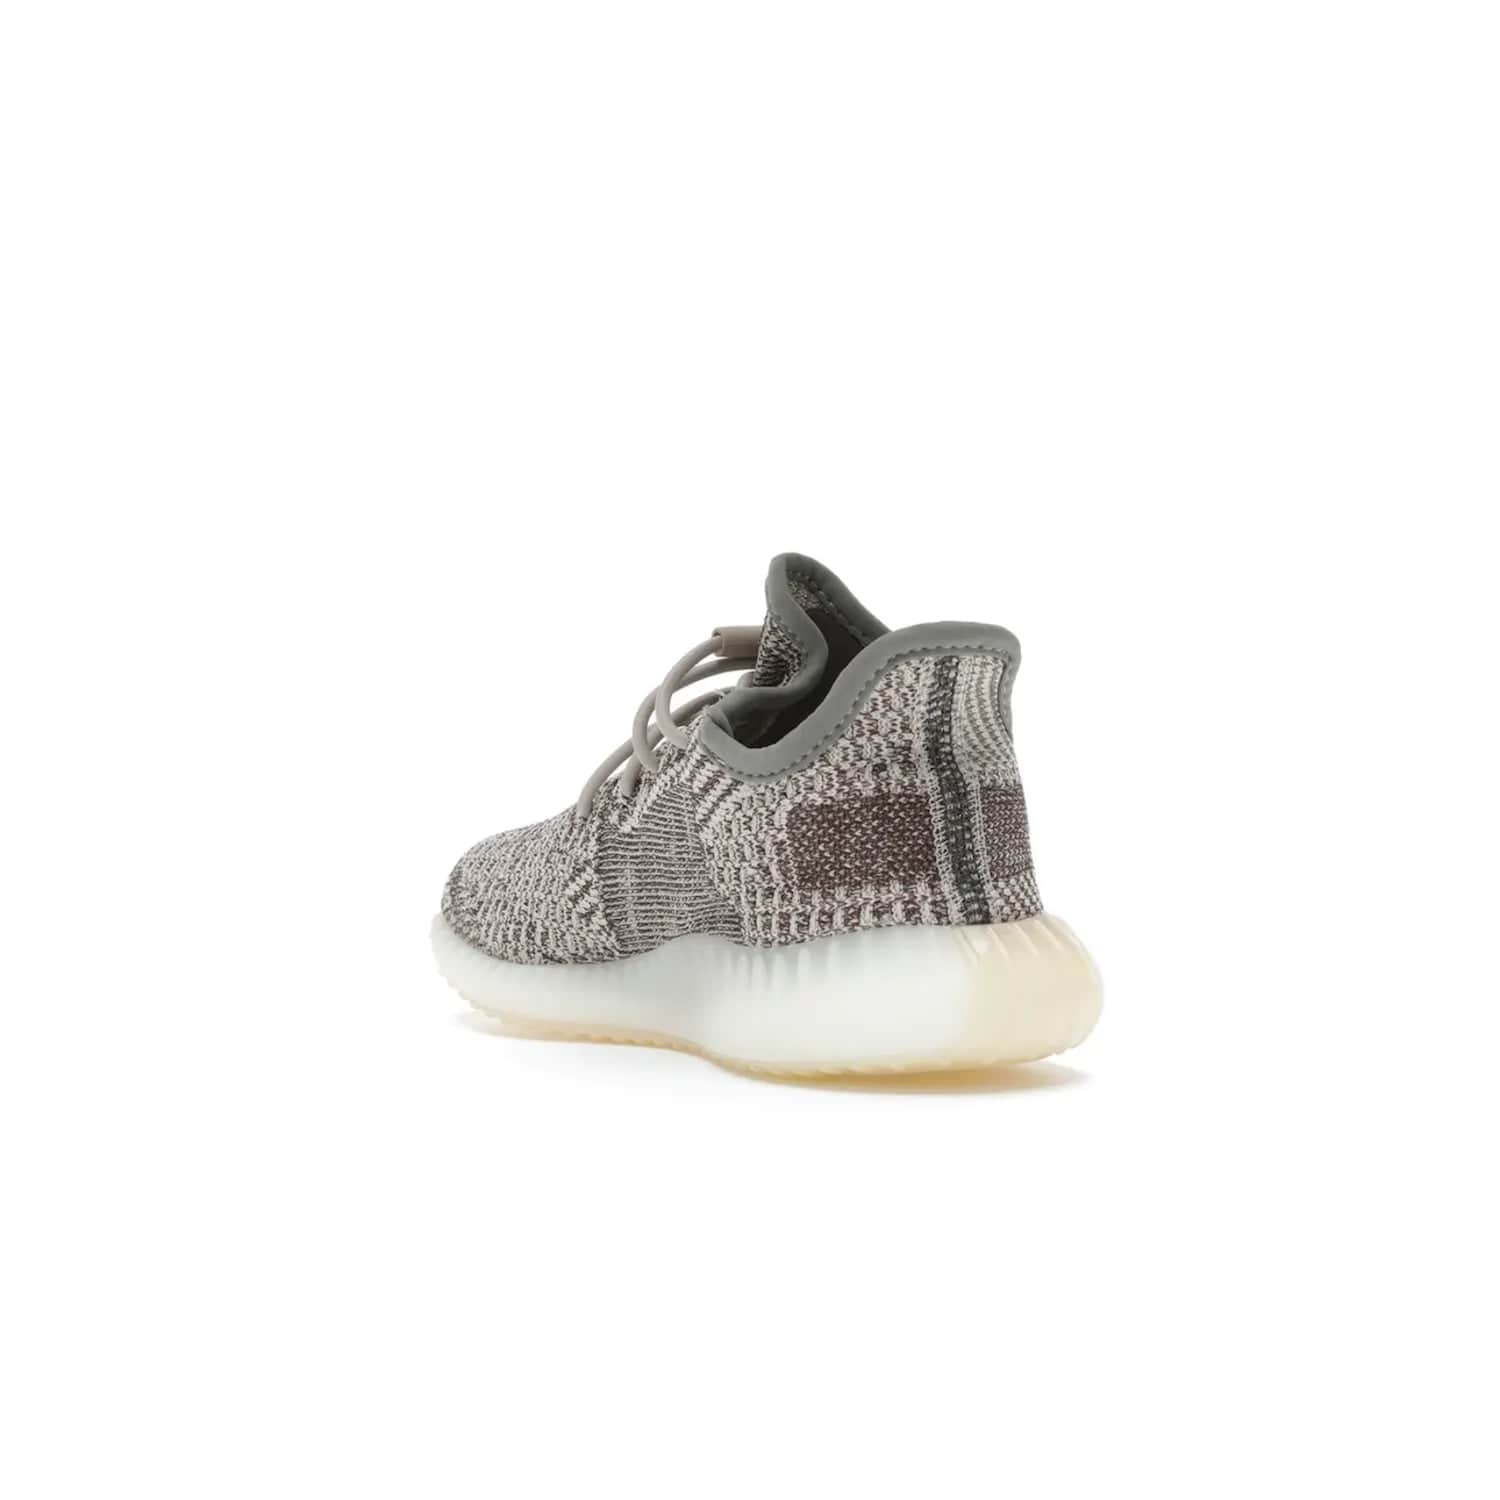 adidas Yeezy Boost 350 V2 Zyon (Kids) - Image 25 - Only at www.BallersClubKickz.com - The adidas Yeezy Boost 350 V2 Zyon (Kids) - perfect pick for fashion-savvy kids. Features soft Primeknit upper, lace closure & colorful patterning. Comfort & style for kids' summer outfits!